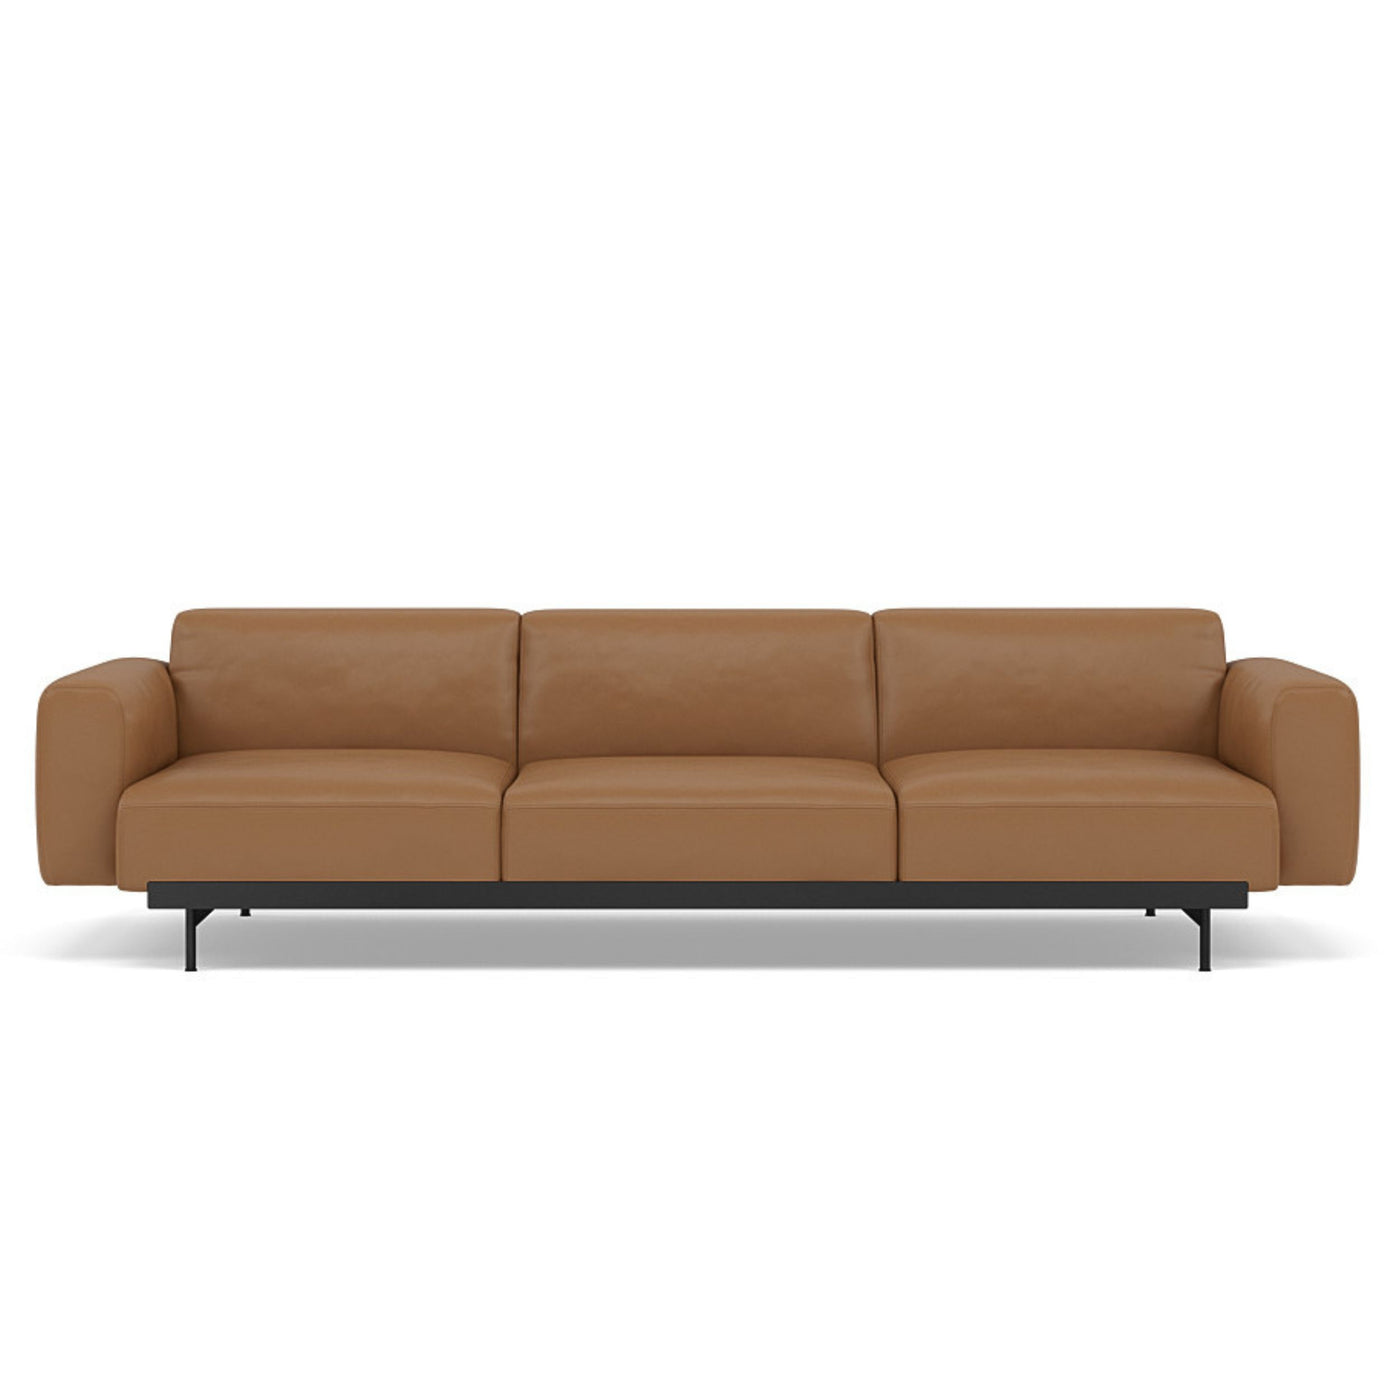 Muuto In Situ Modular 3 Seater Sofa, configuration 1. Made to order from someday designs. #colour_cognac-refine-leather